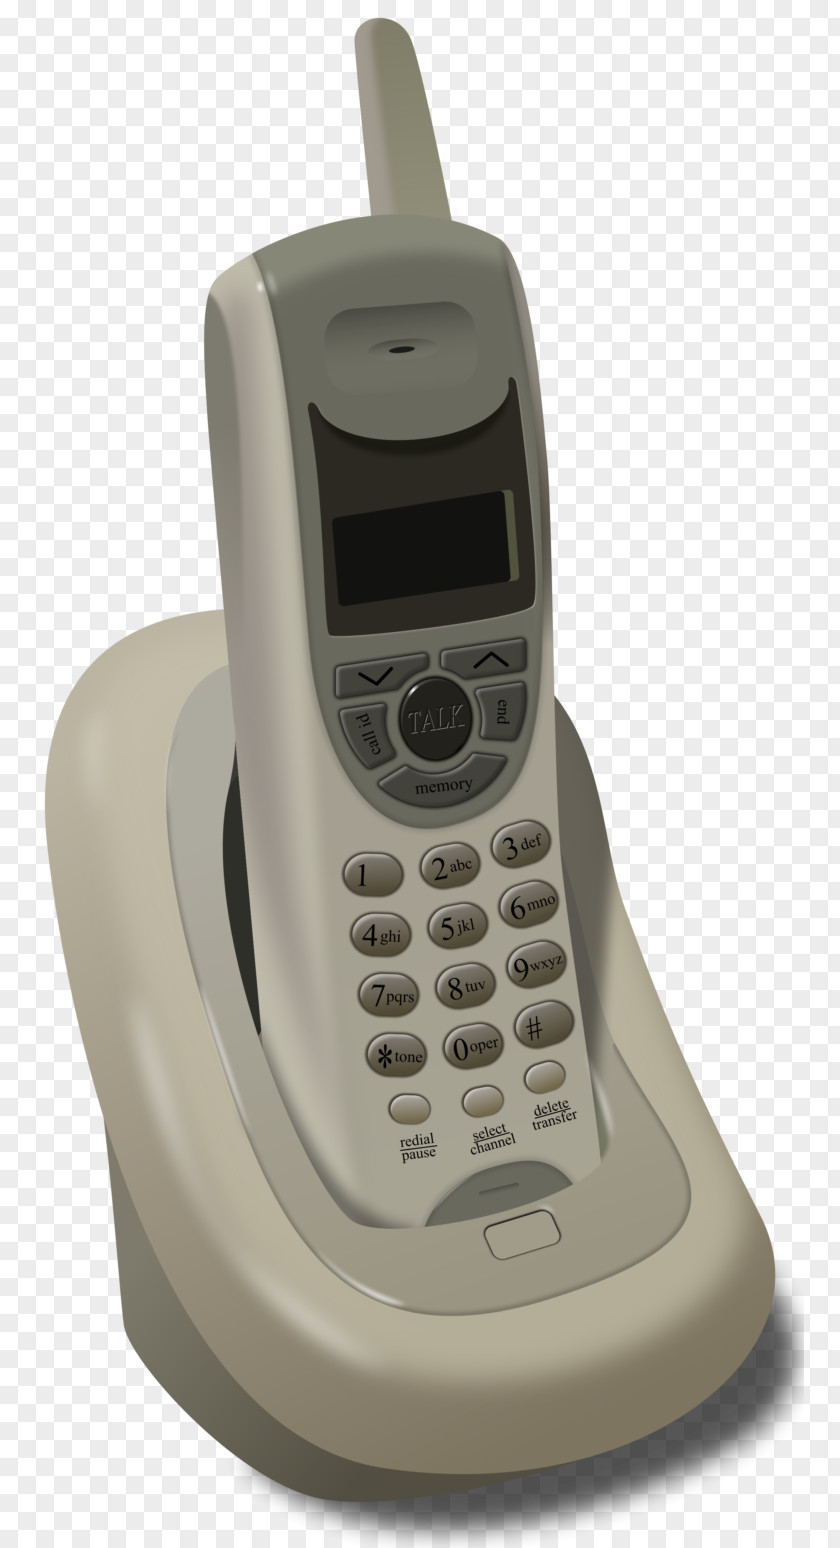 Cordless Telephone Mobile Phones Home & Business PNG